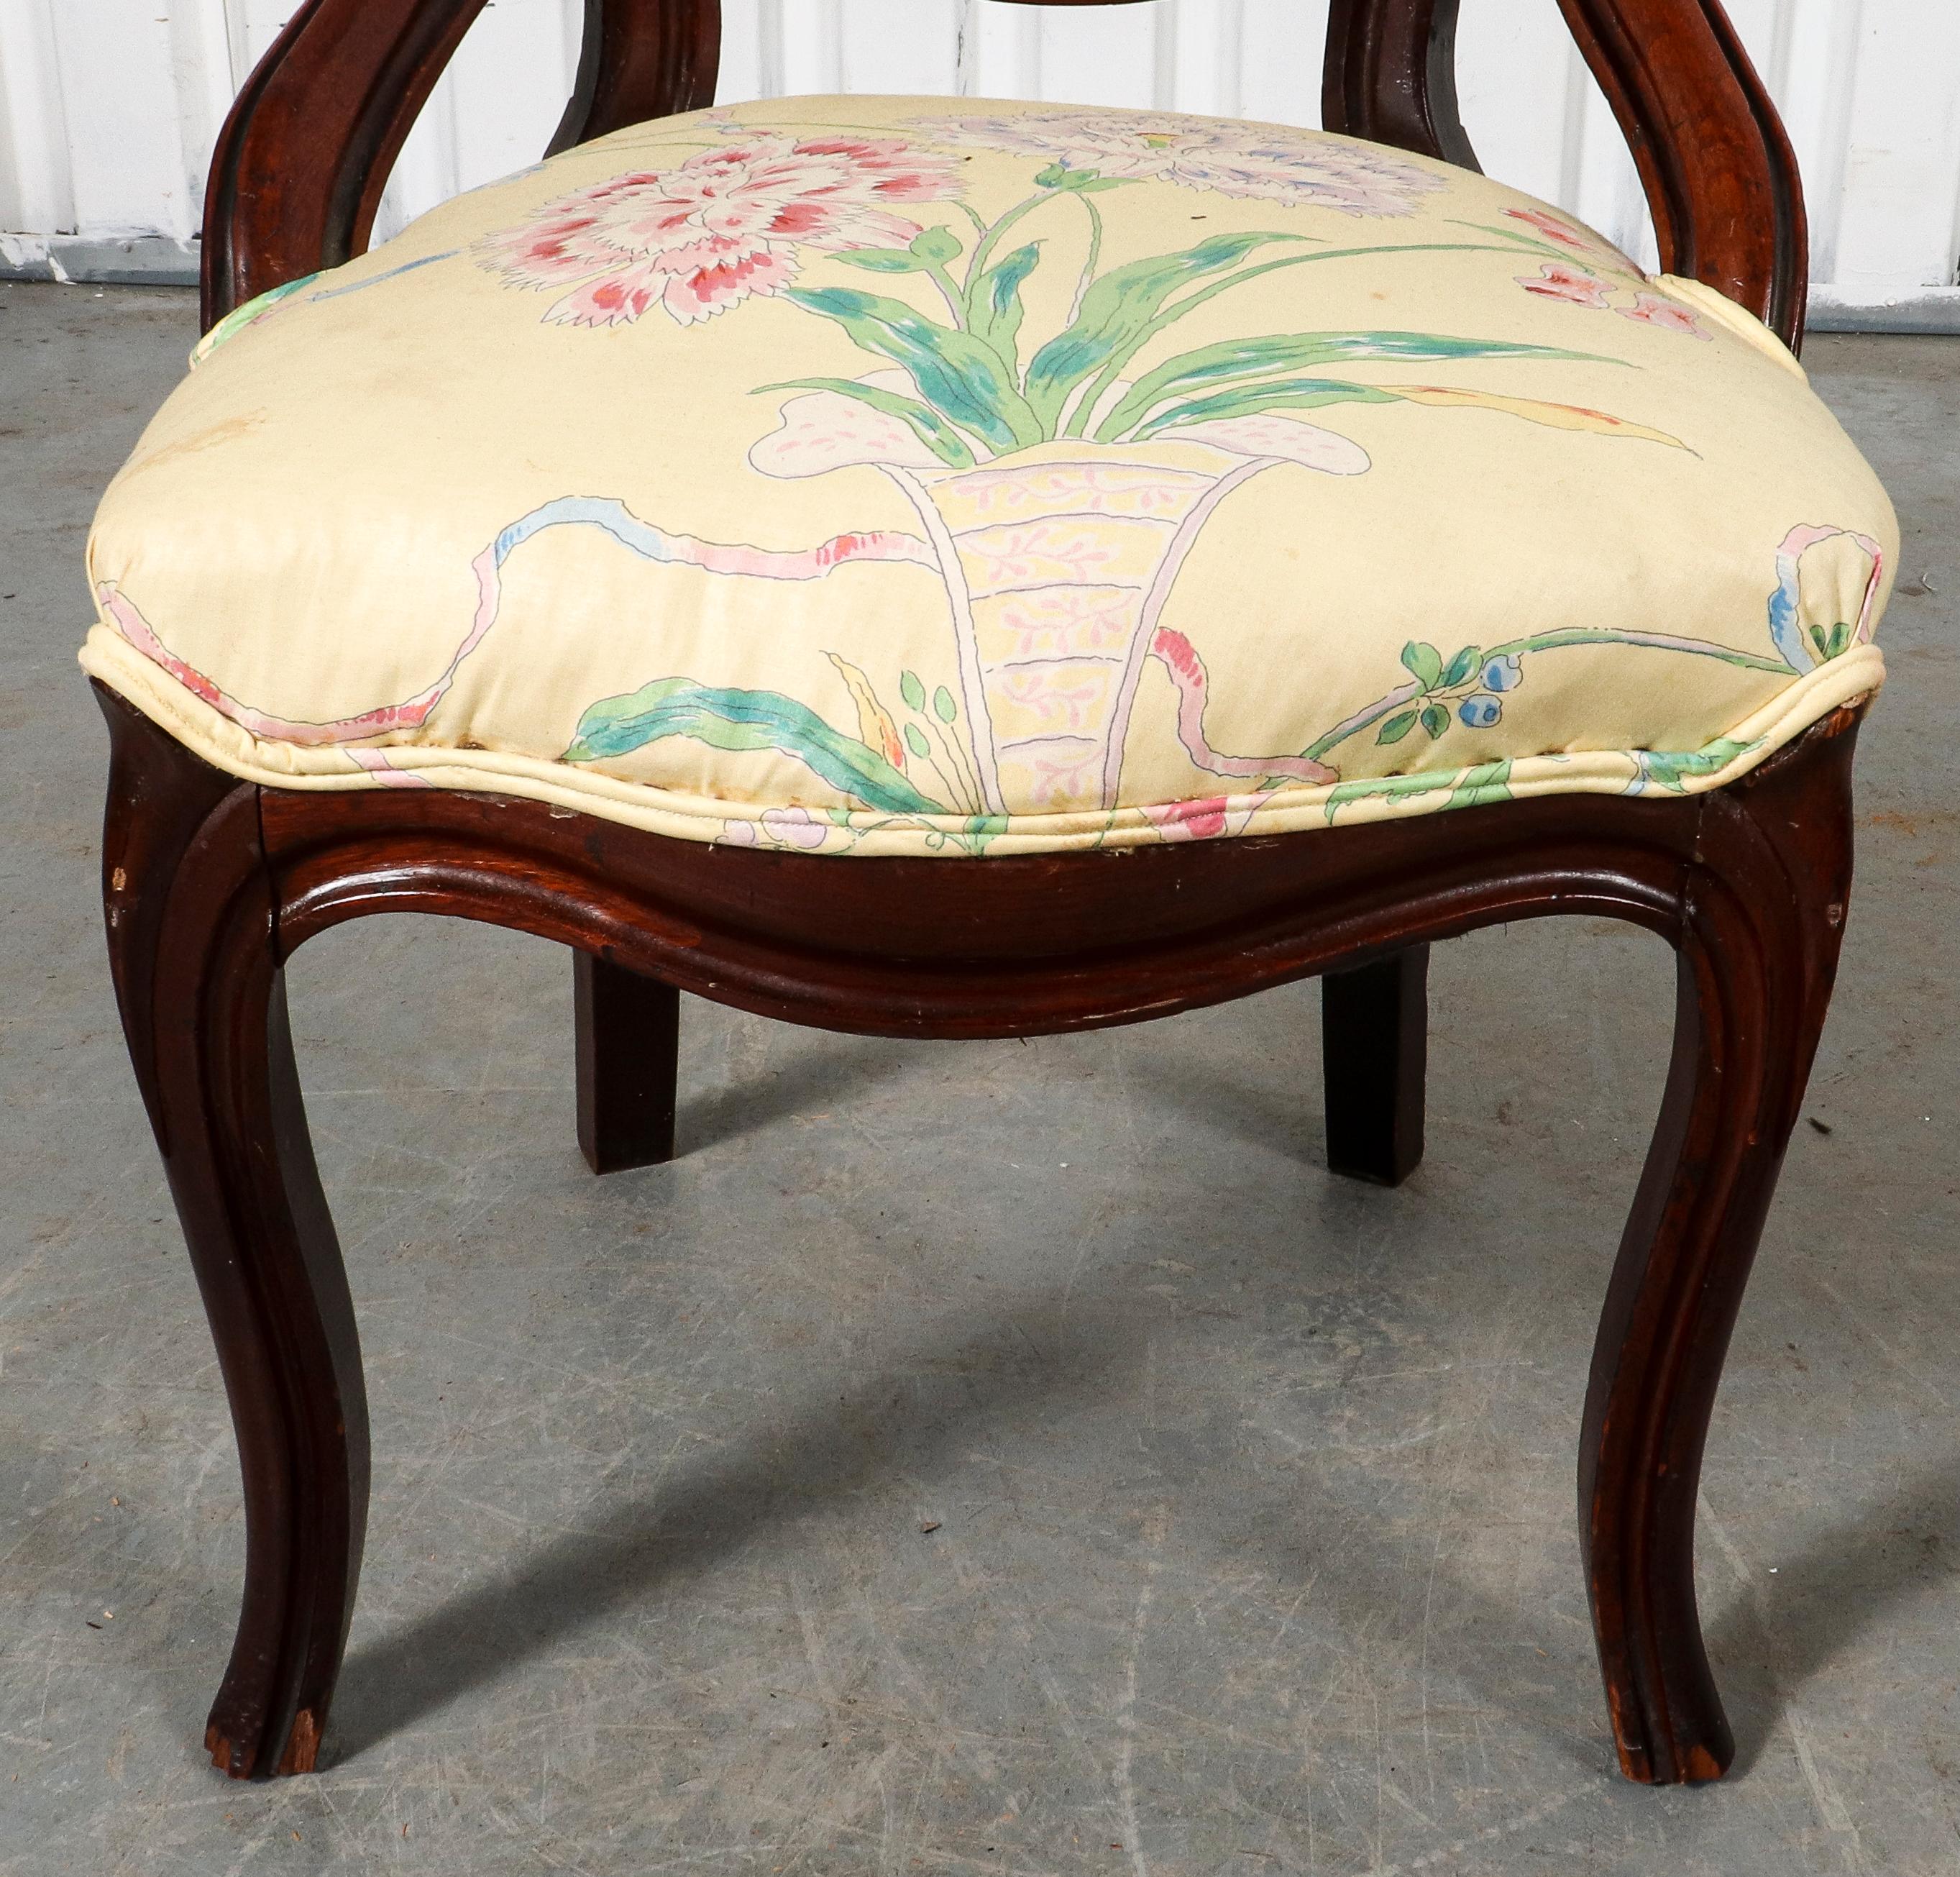 American Rococo Revival Style Wooden Chairs For Sale 7